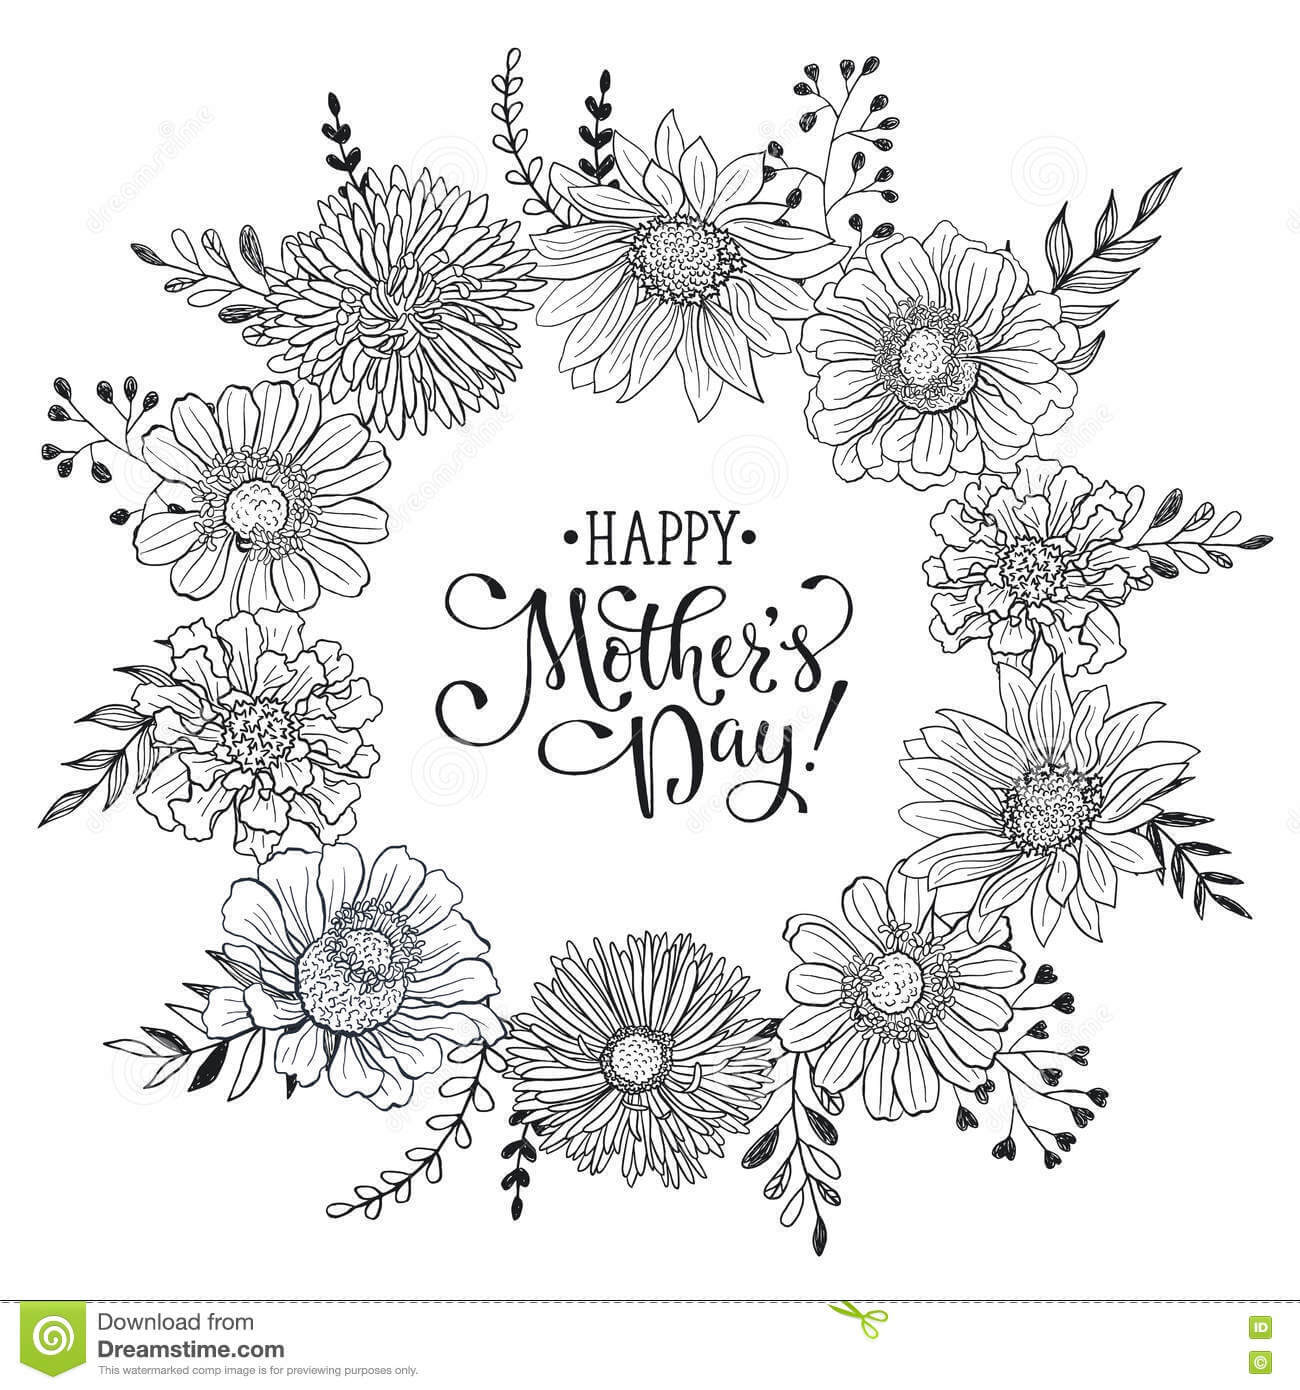 Mother's Day Card Stock Vector. Illustration Of Monochrome For Mothers Day Card Templates